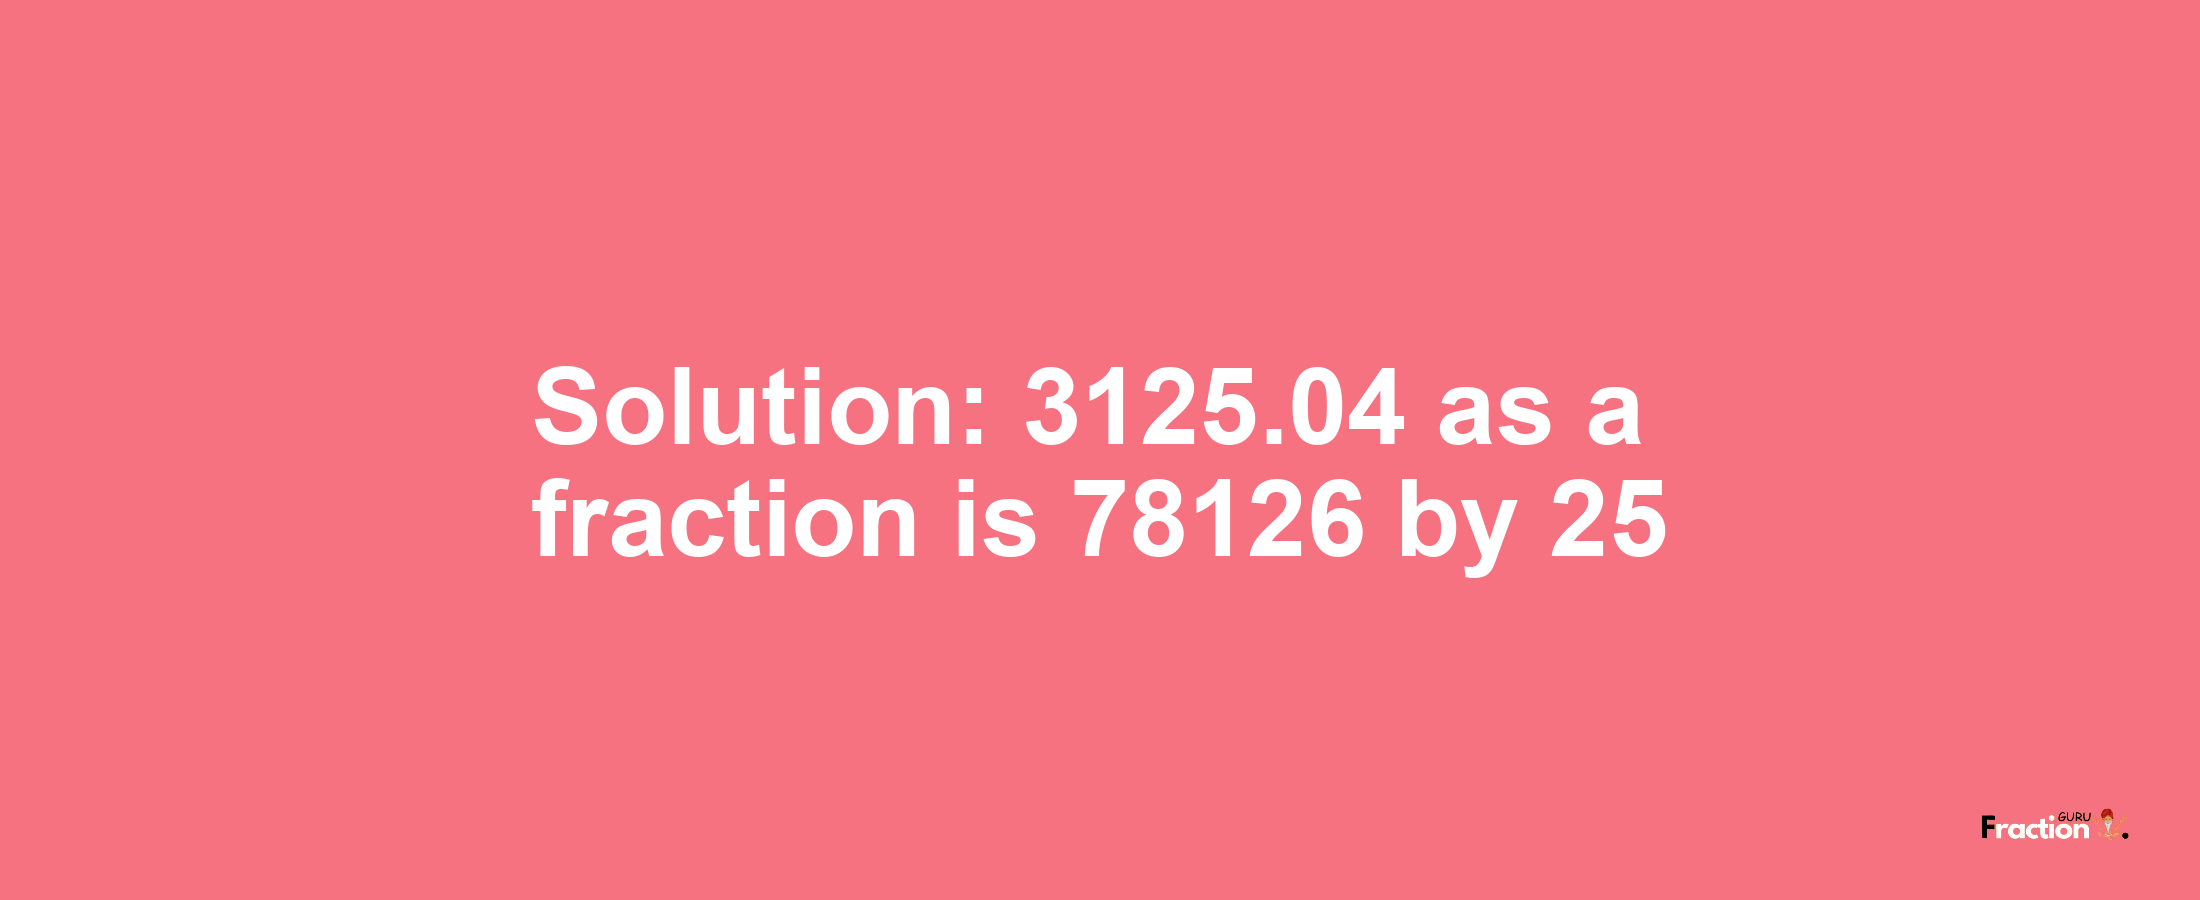 Solution:3125.04 as a fraction is 78126/25